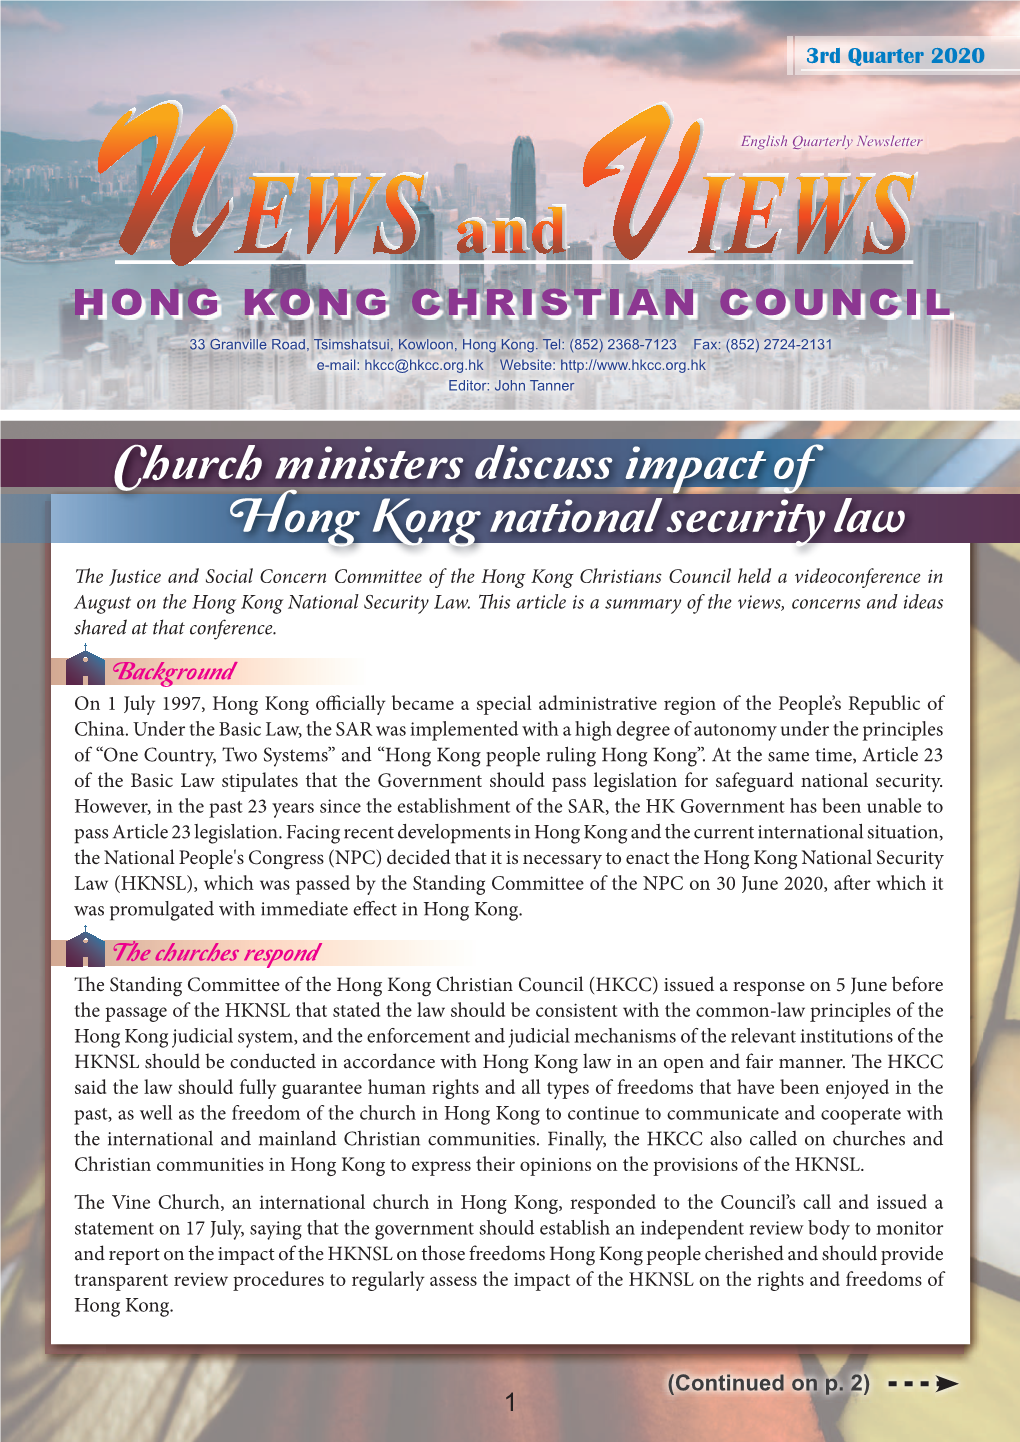 Church Ministers Discuss Impact of Hong Kong National Security Law